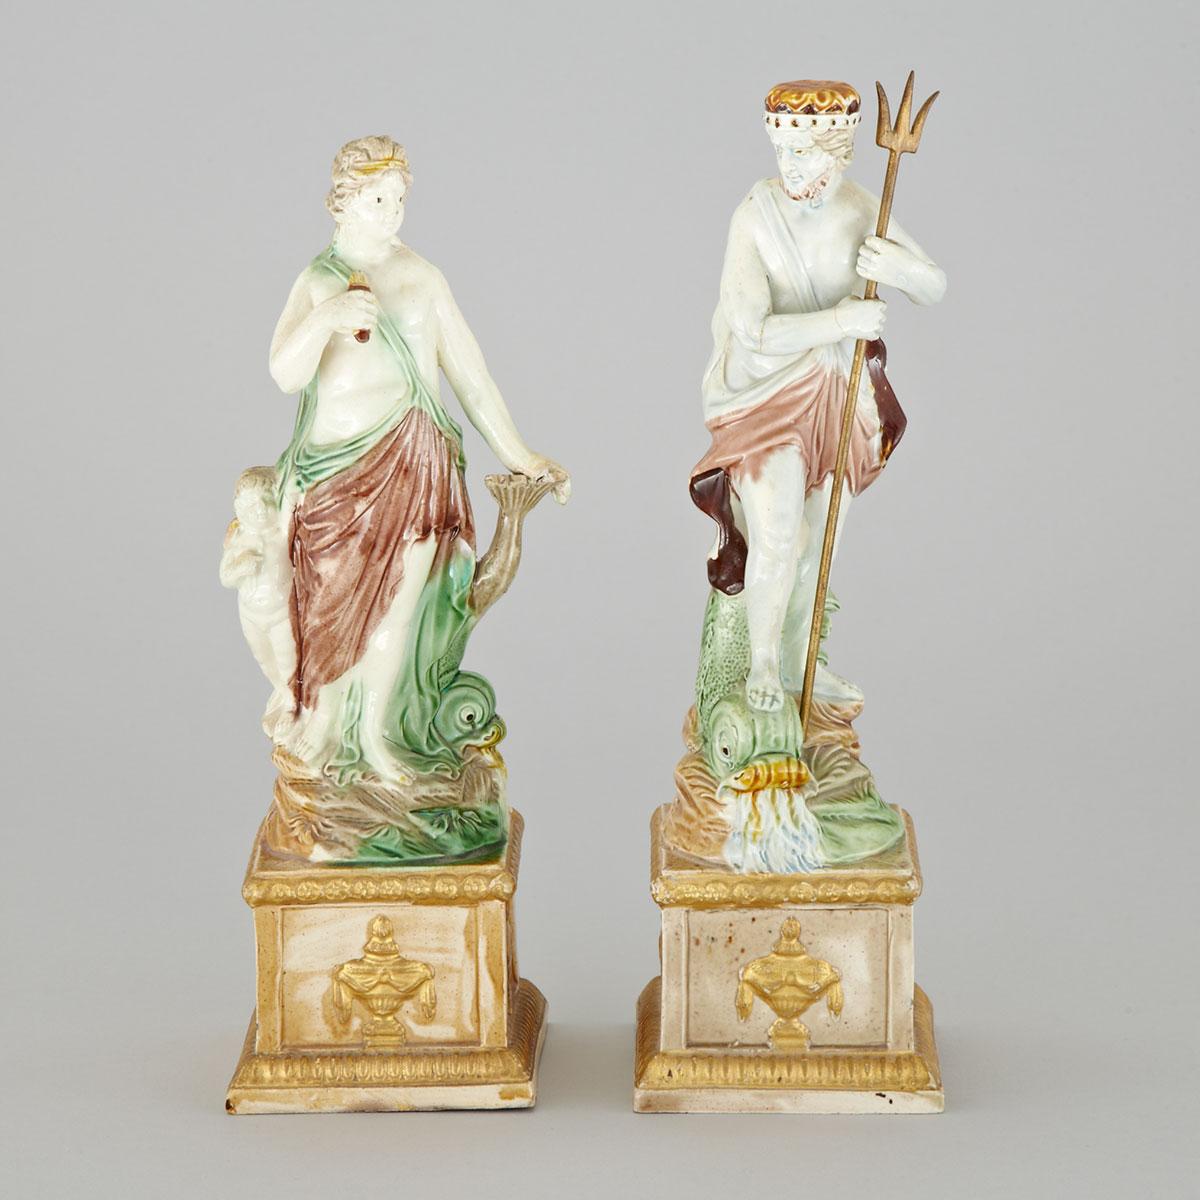 Pair of English Pearlware Figures of Venus and Neptune, late 18th century